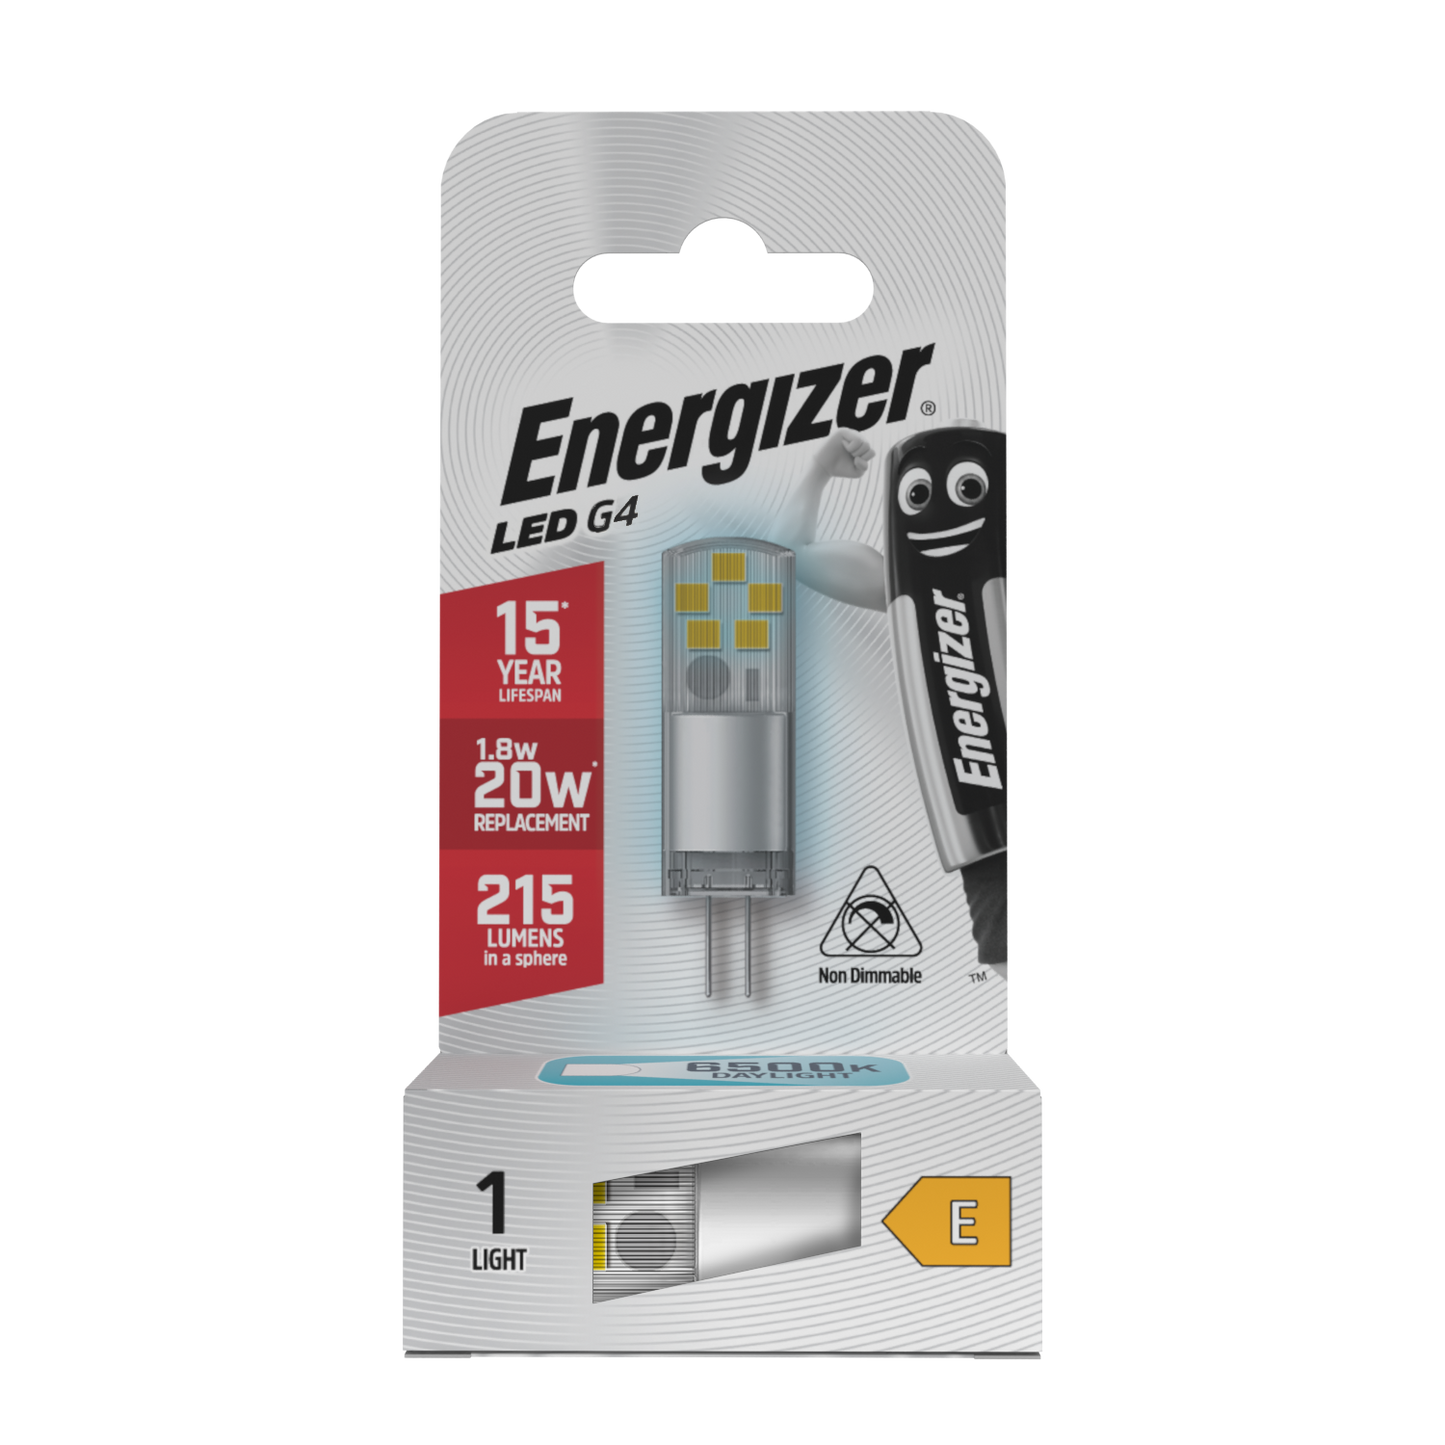 Energizer LED G4 Capsule - 1.8W, 215 Lumens, 6,500K, Non-Dimmable